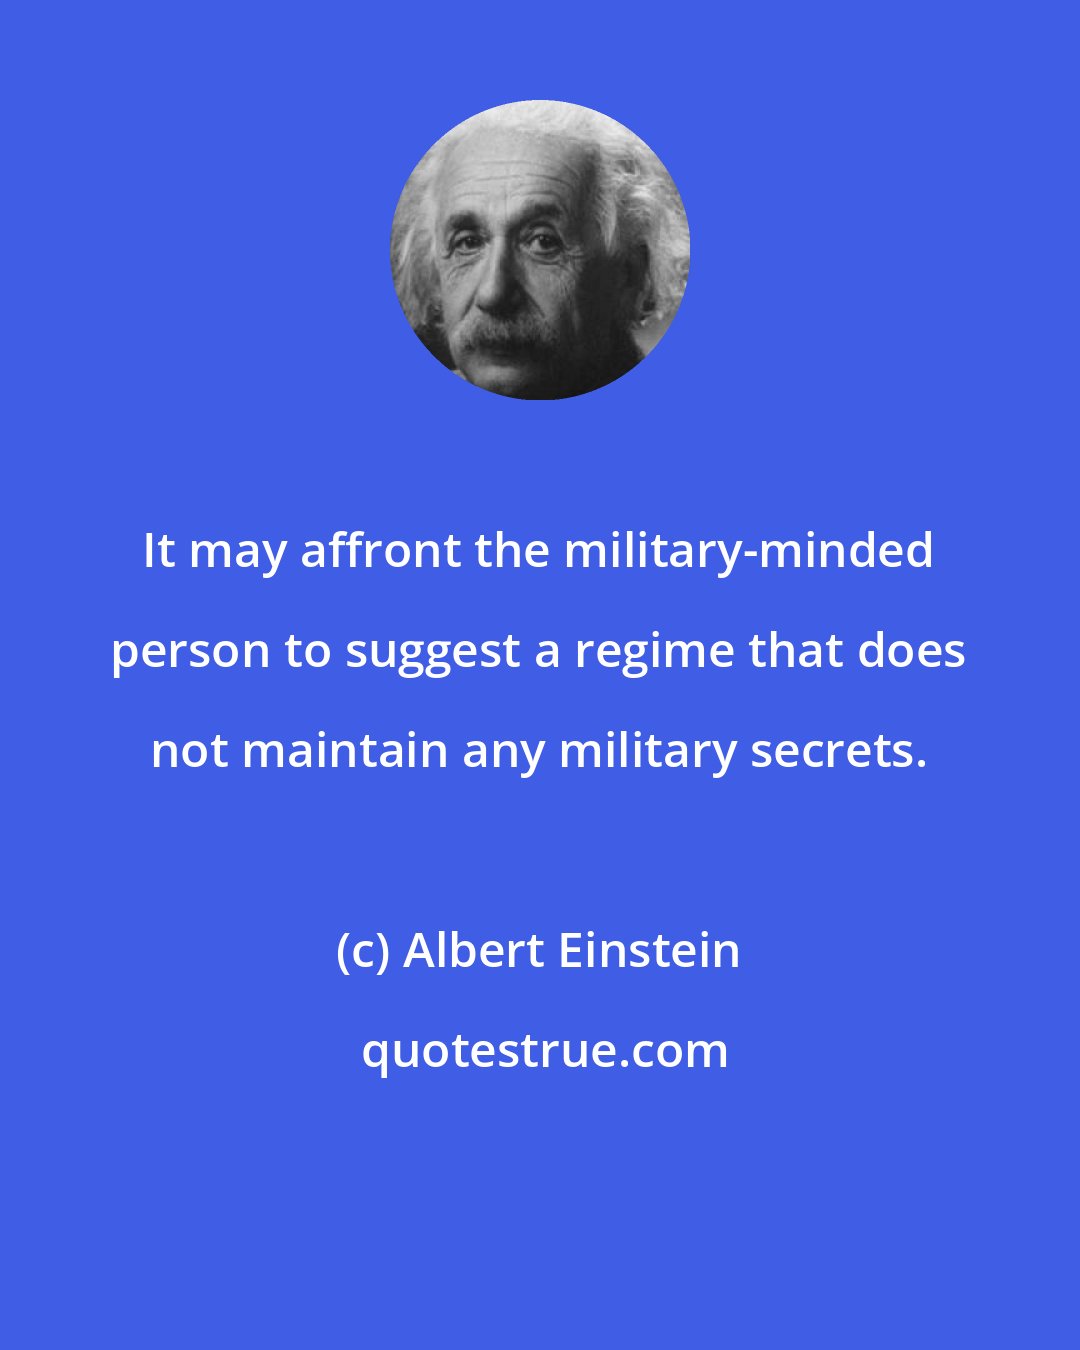 Albert Einstein: It may affront the military-minded person to suggest a regime that does not maintain any military secrets.